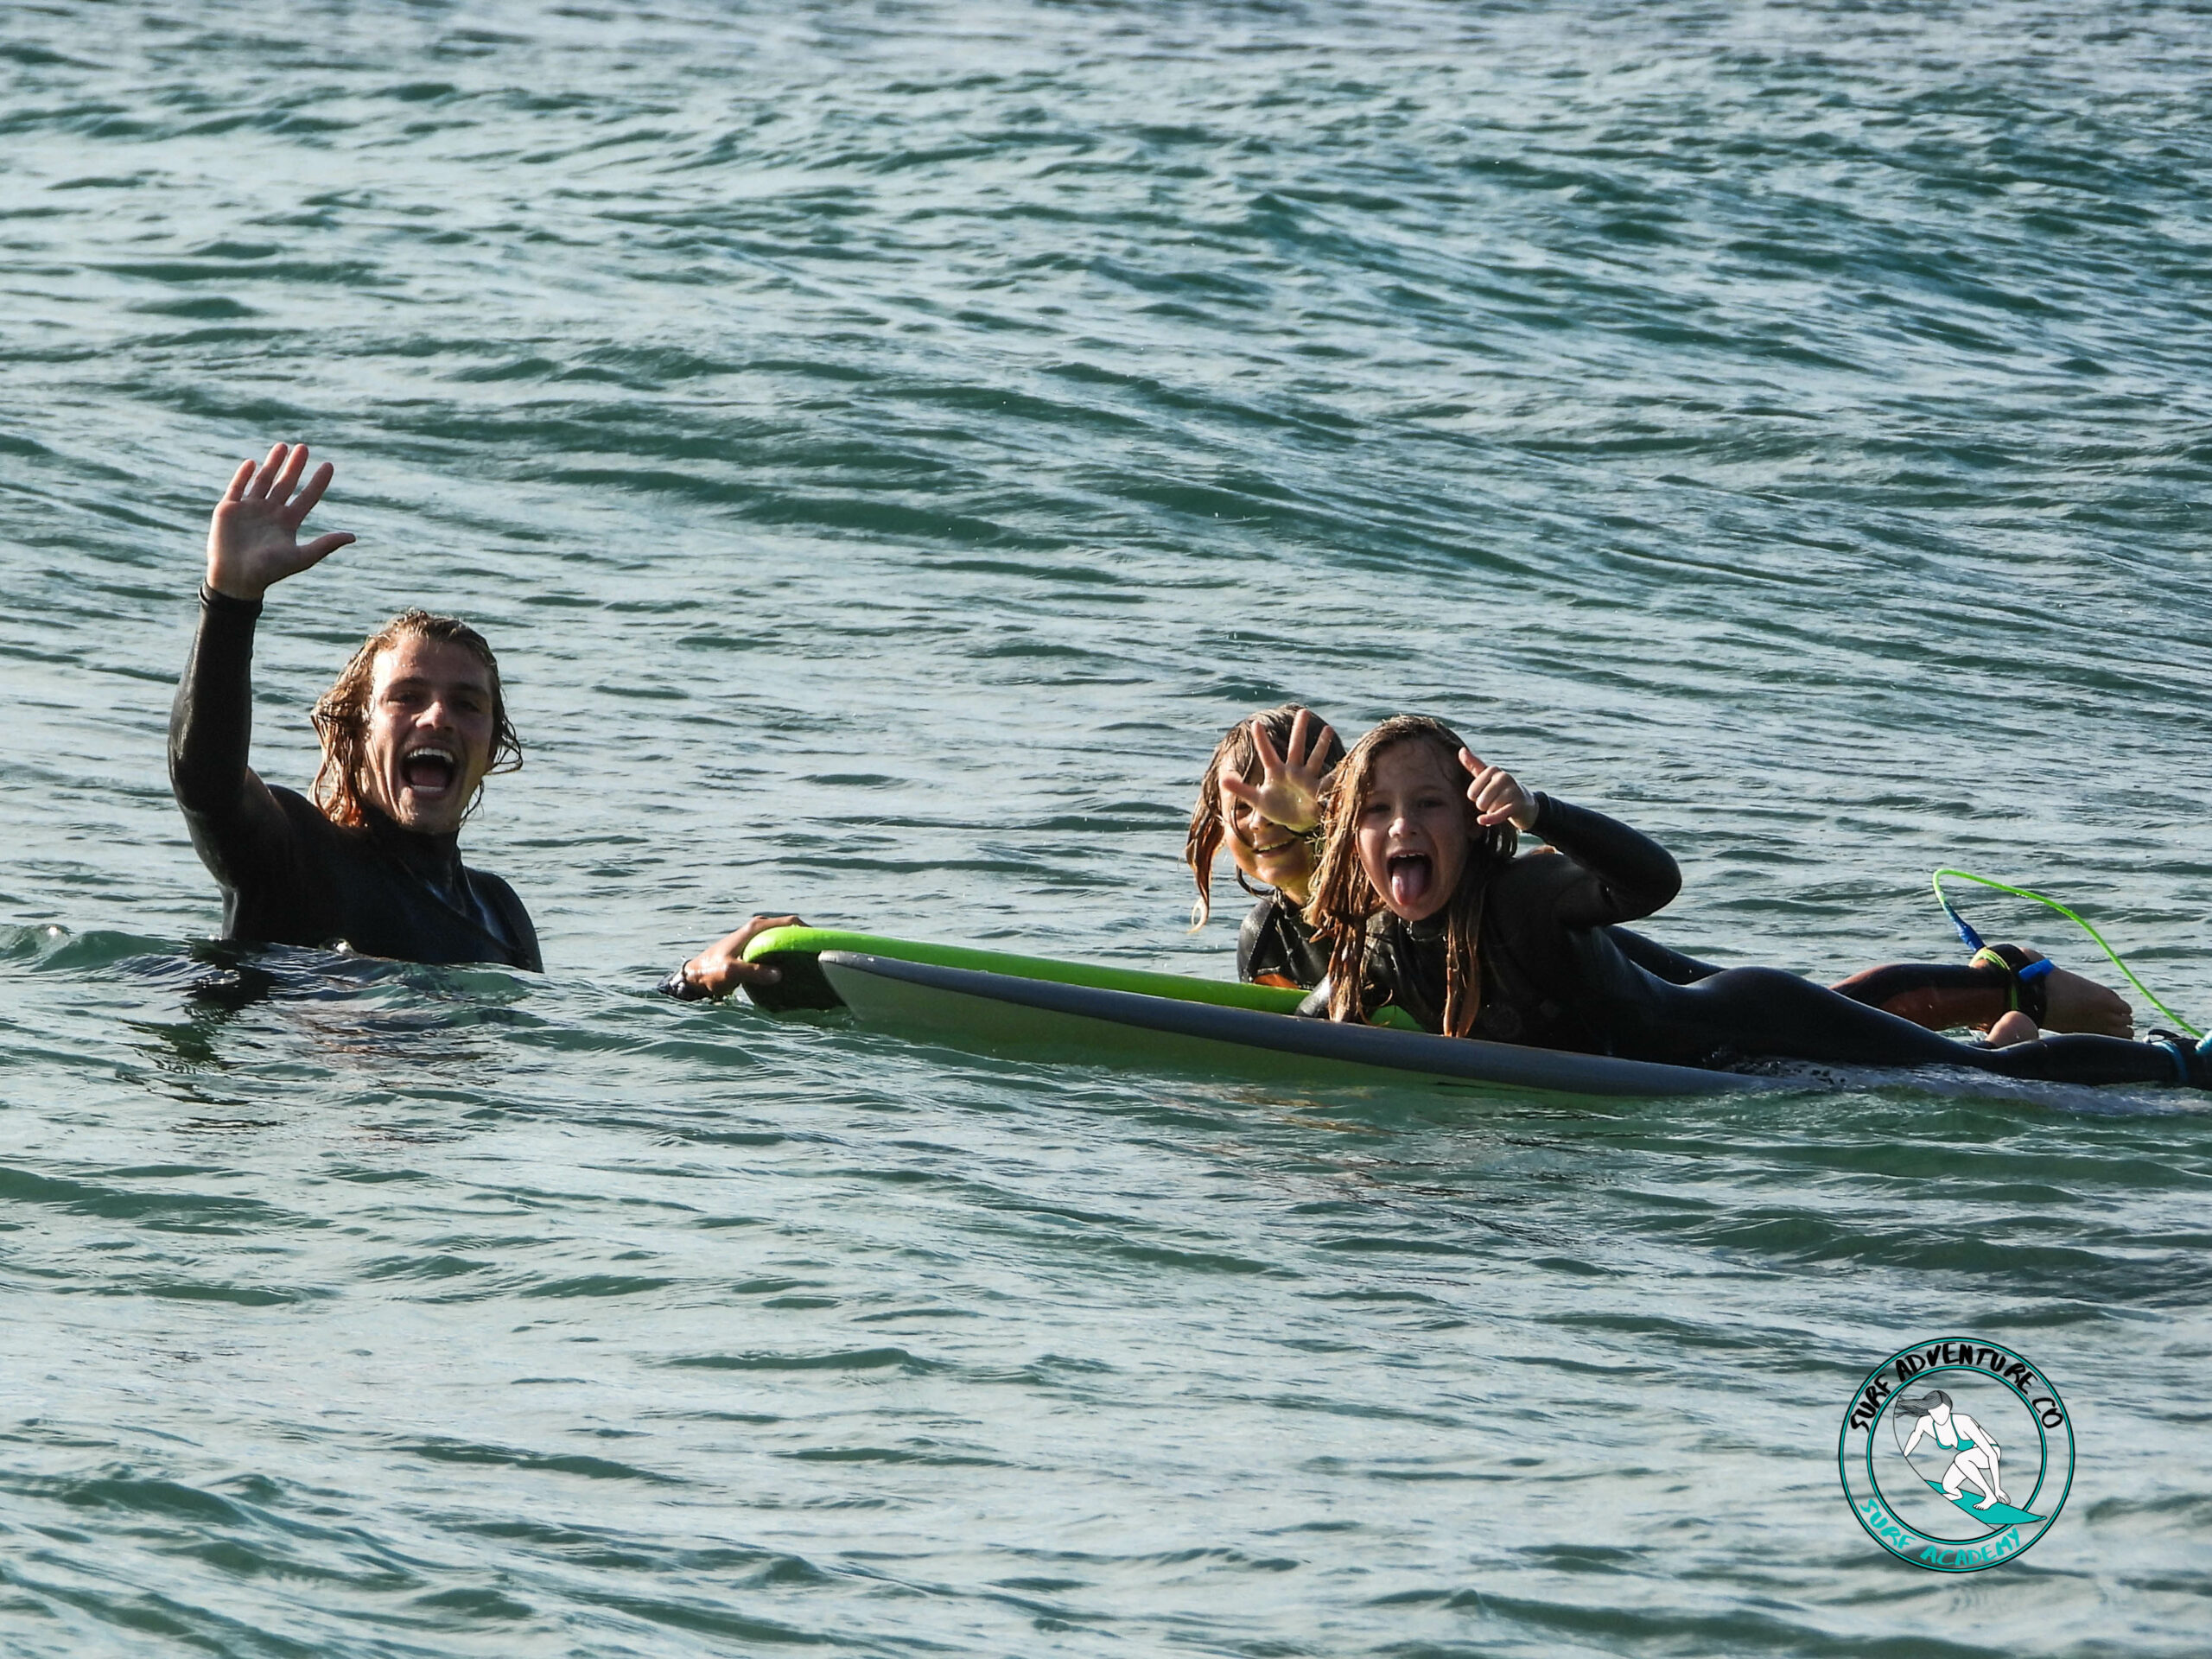 Surf Coaching – Up to 3 Participants – One Hour